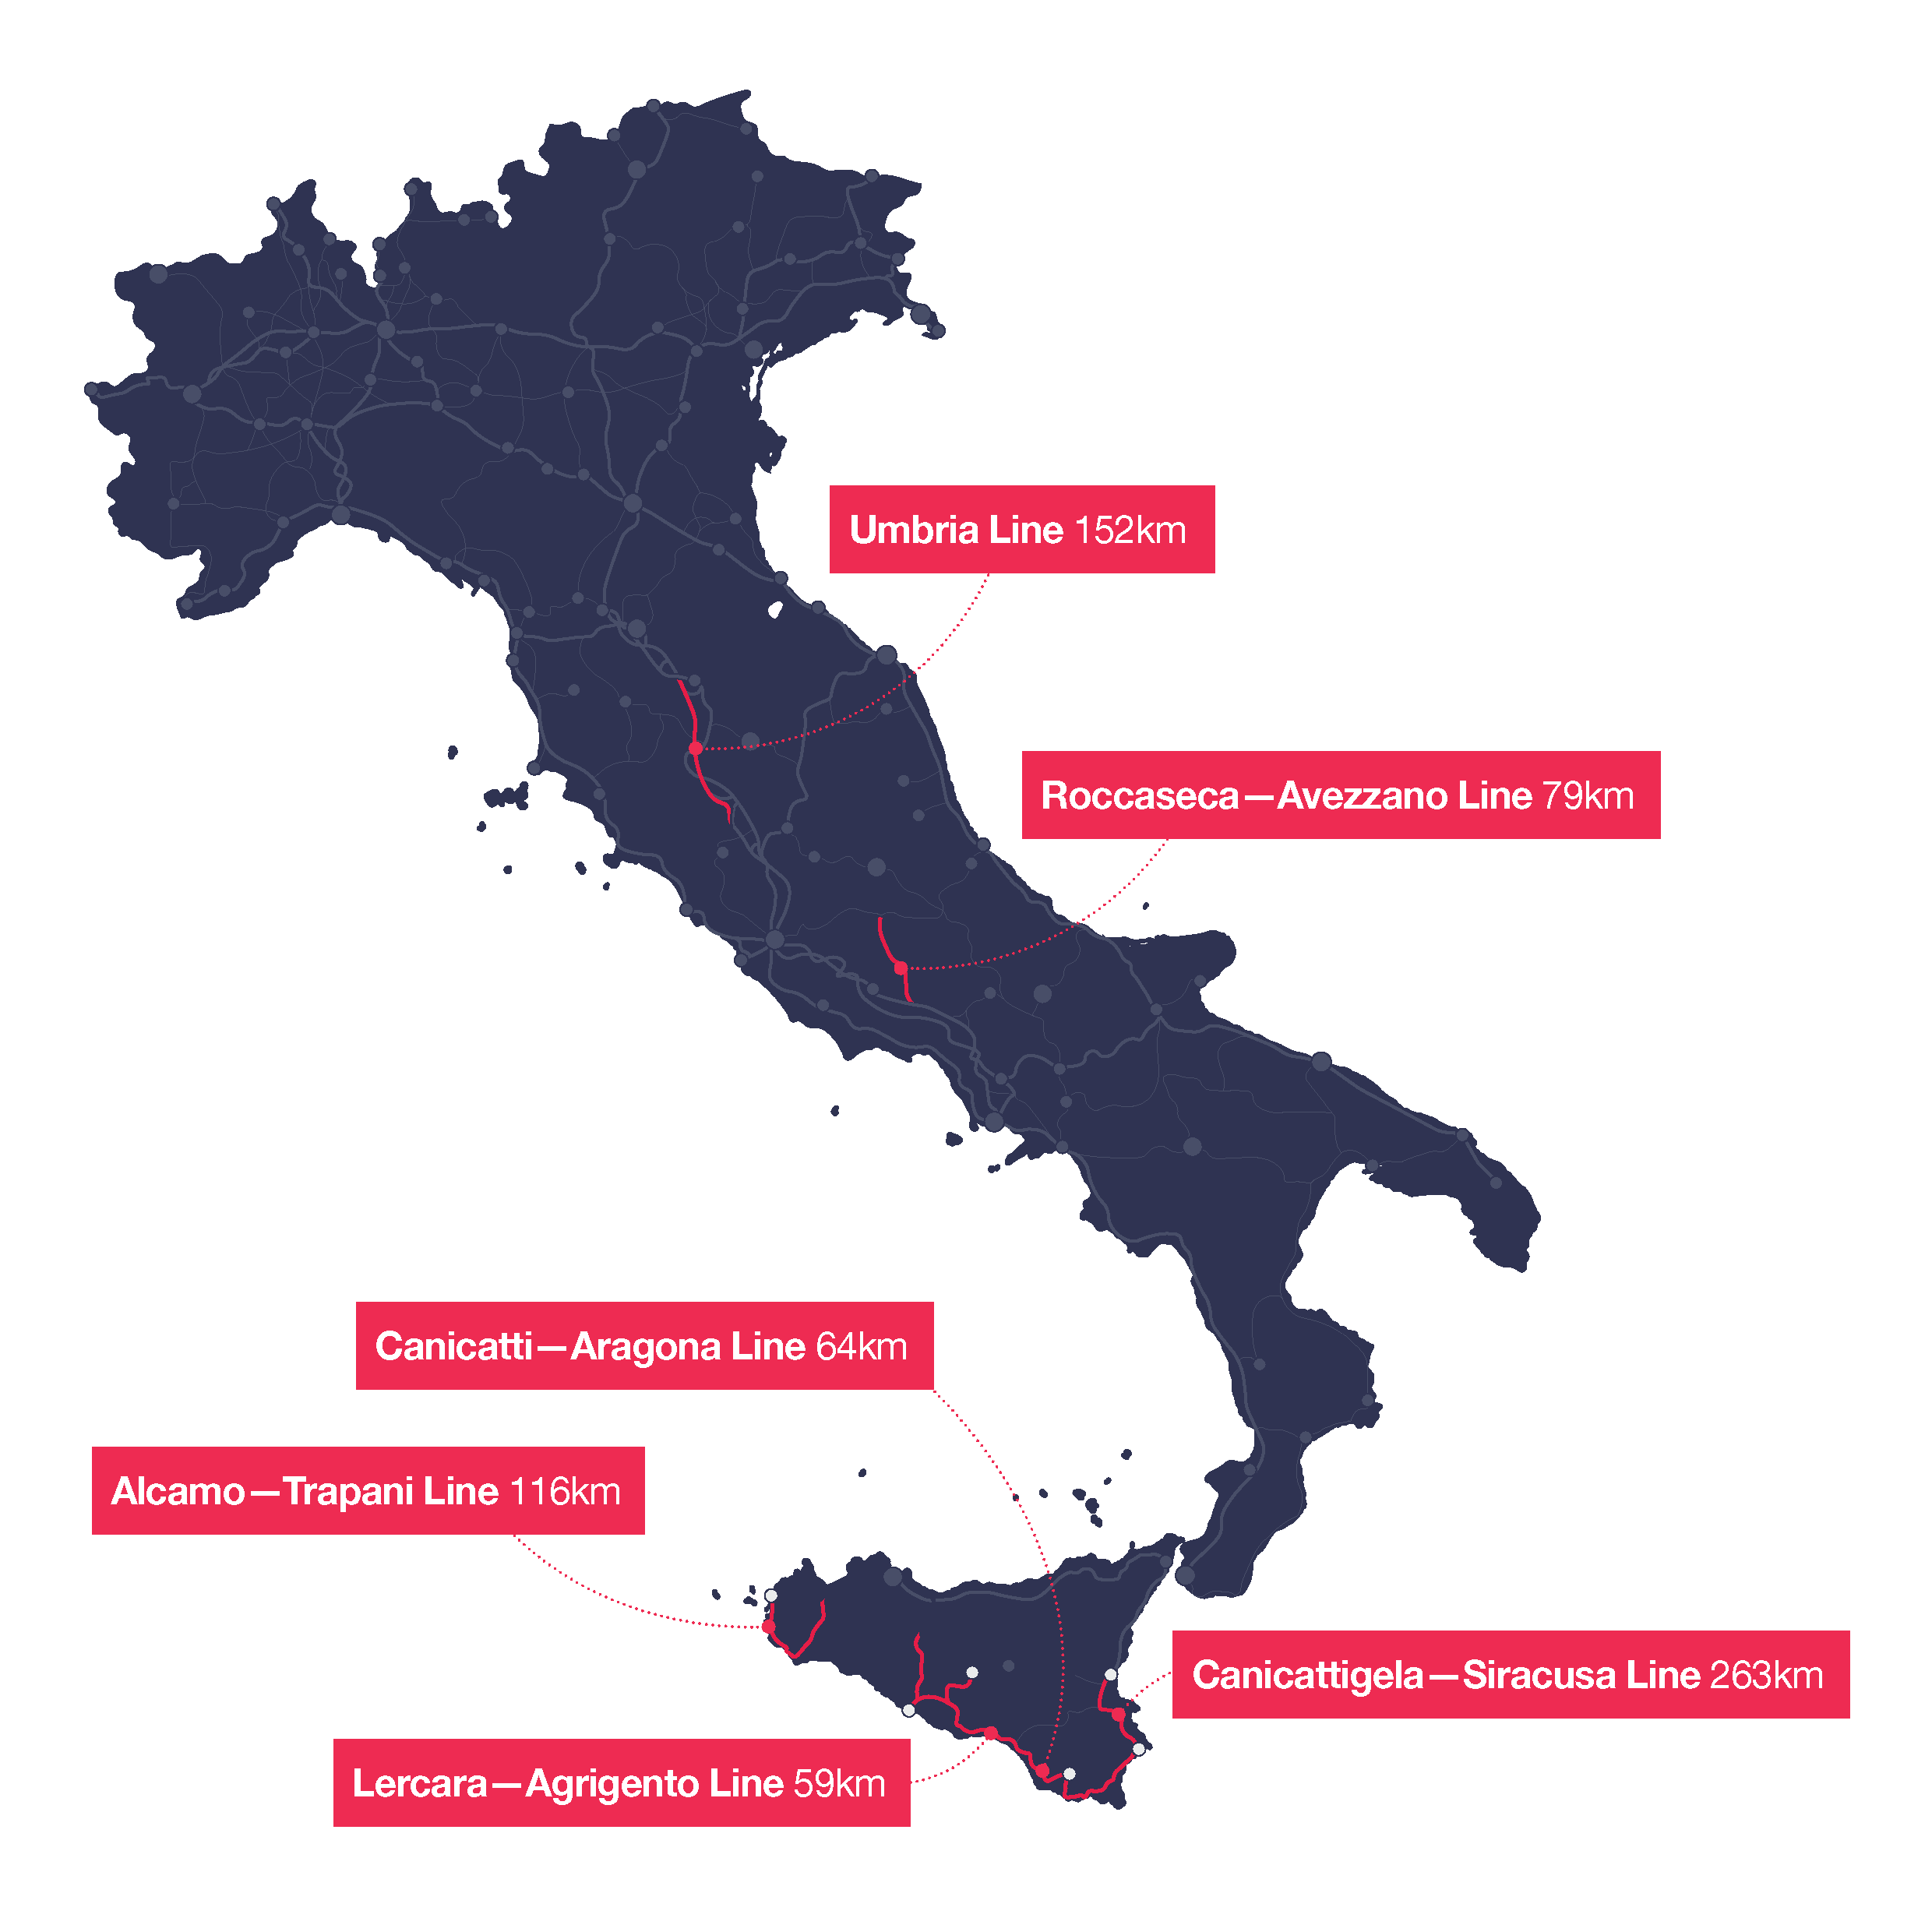 ERTMS implementation in Italy